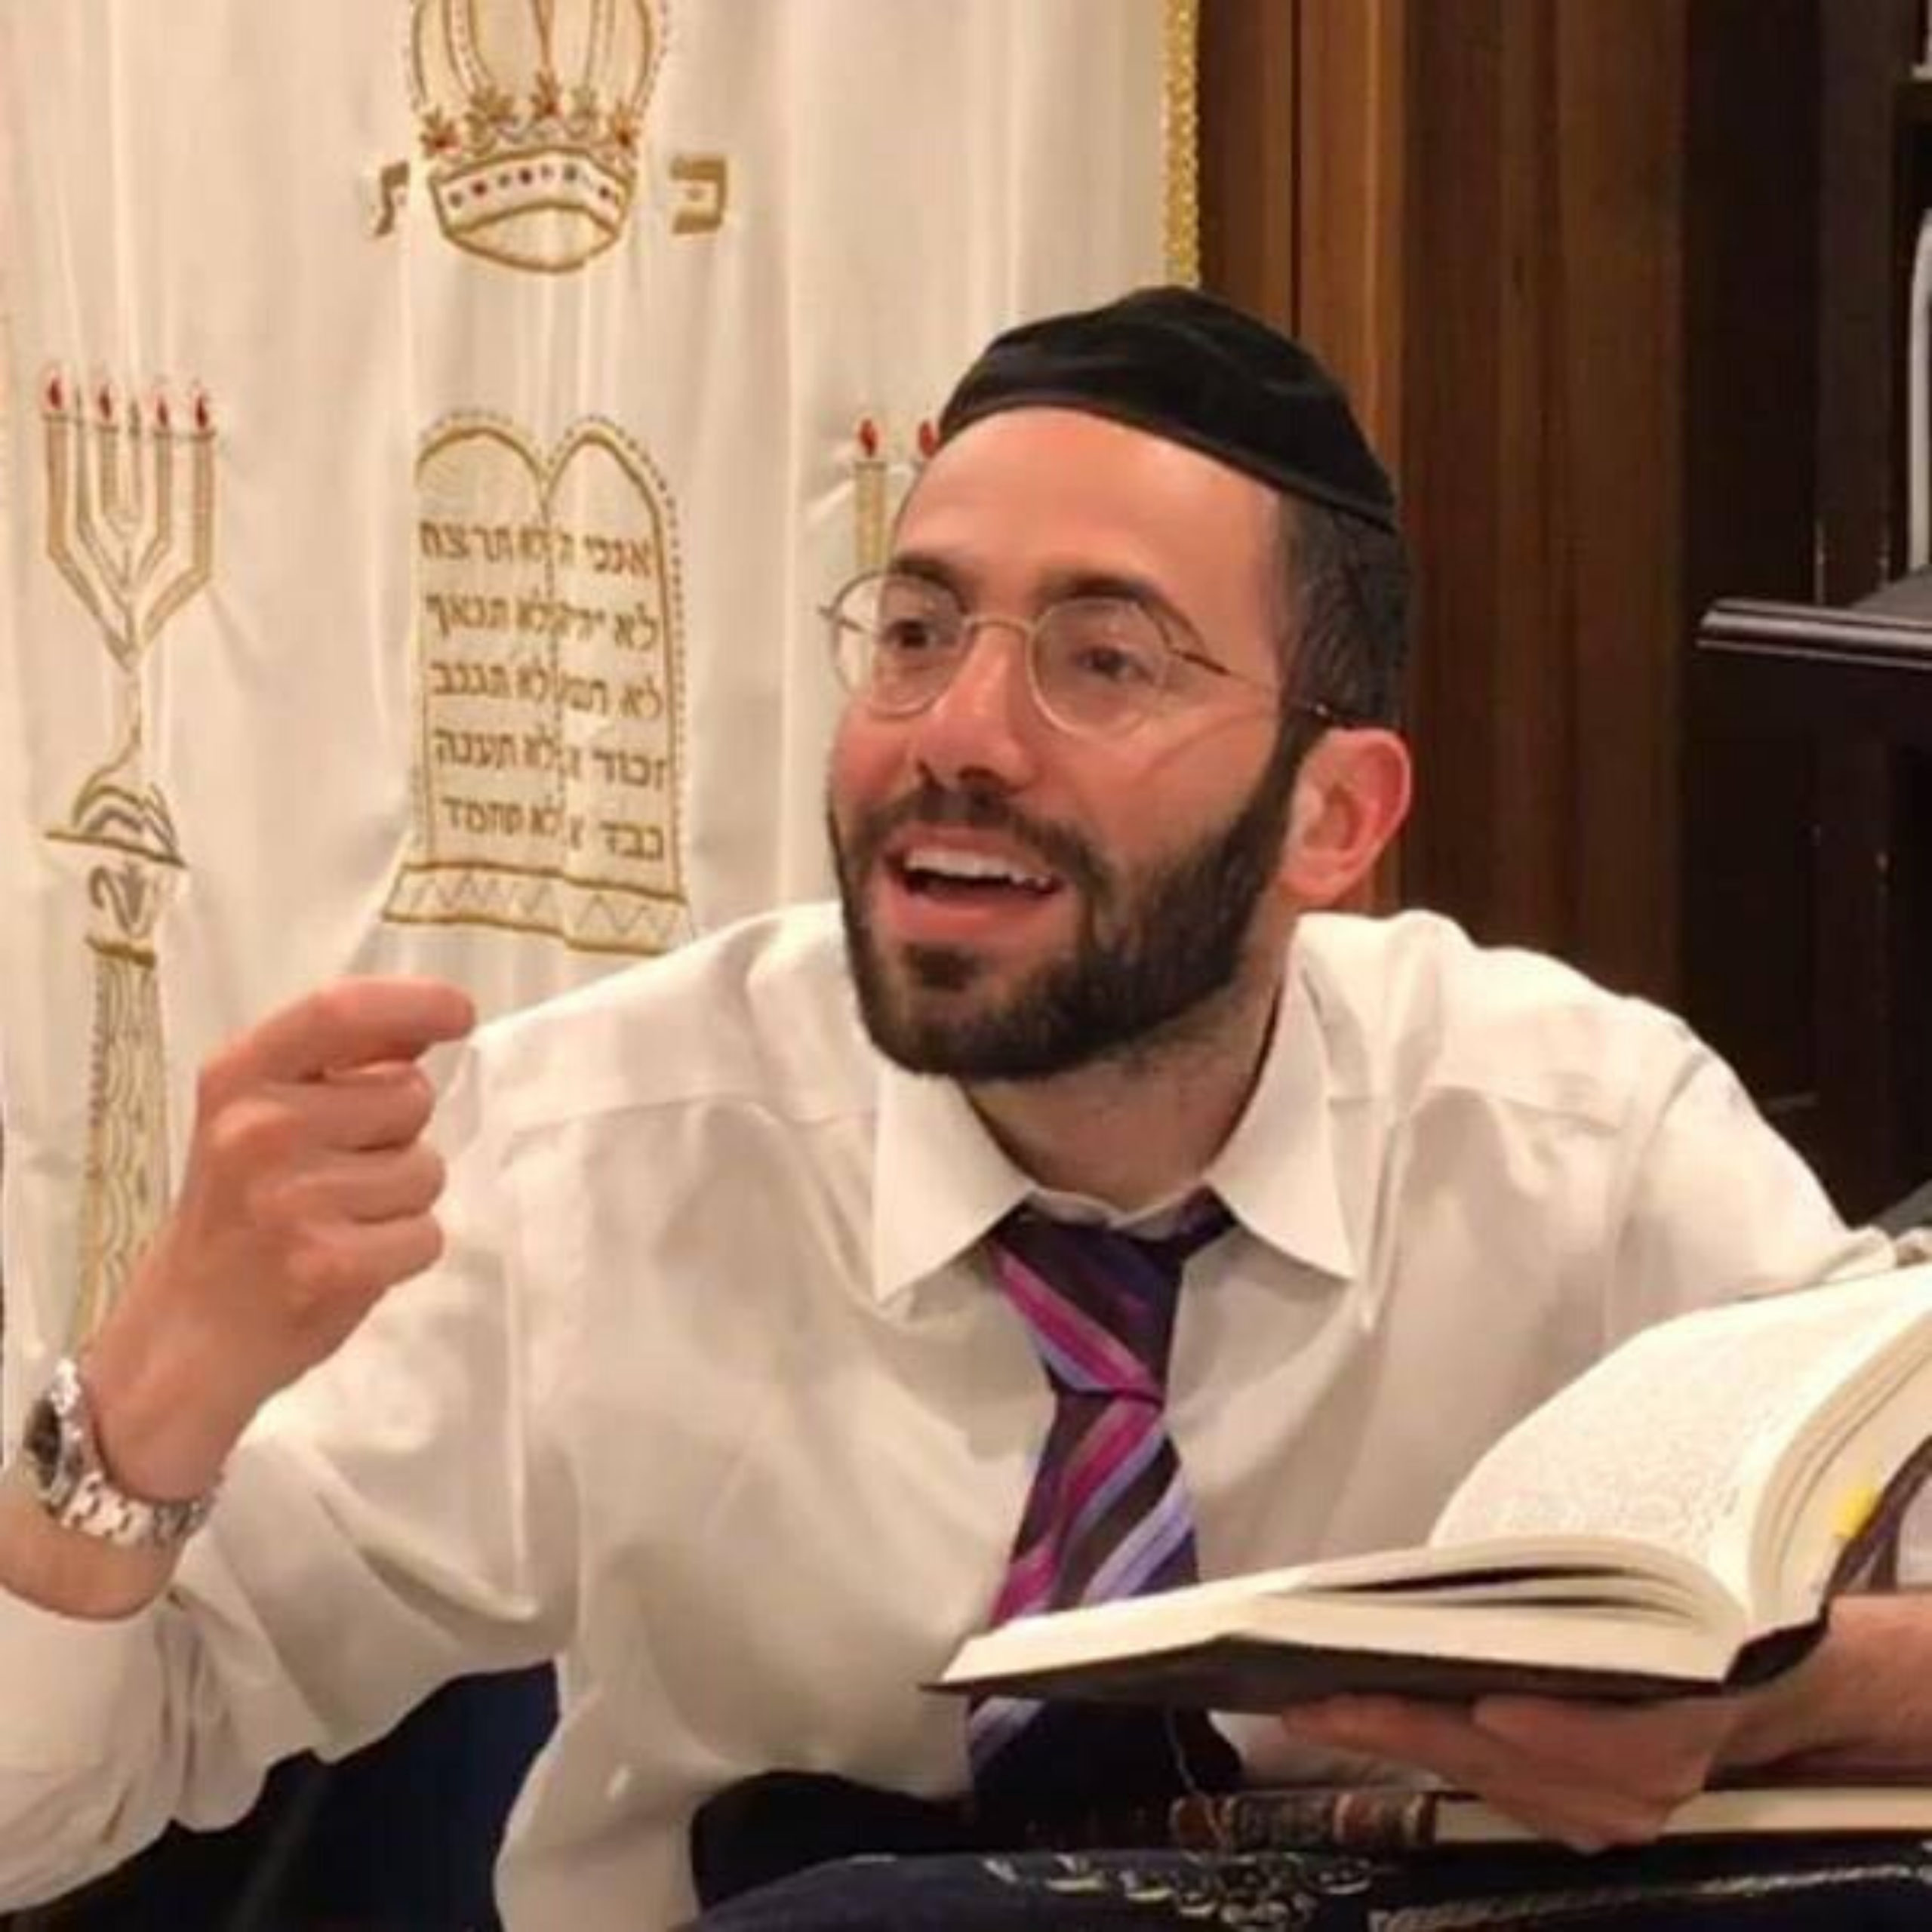 STRONGEST CHIZUK OF LEARNING TORAH – The Real $$$